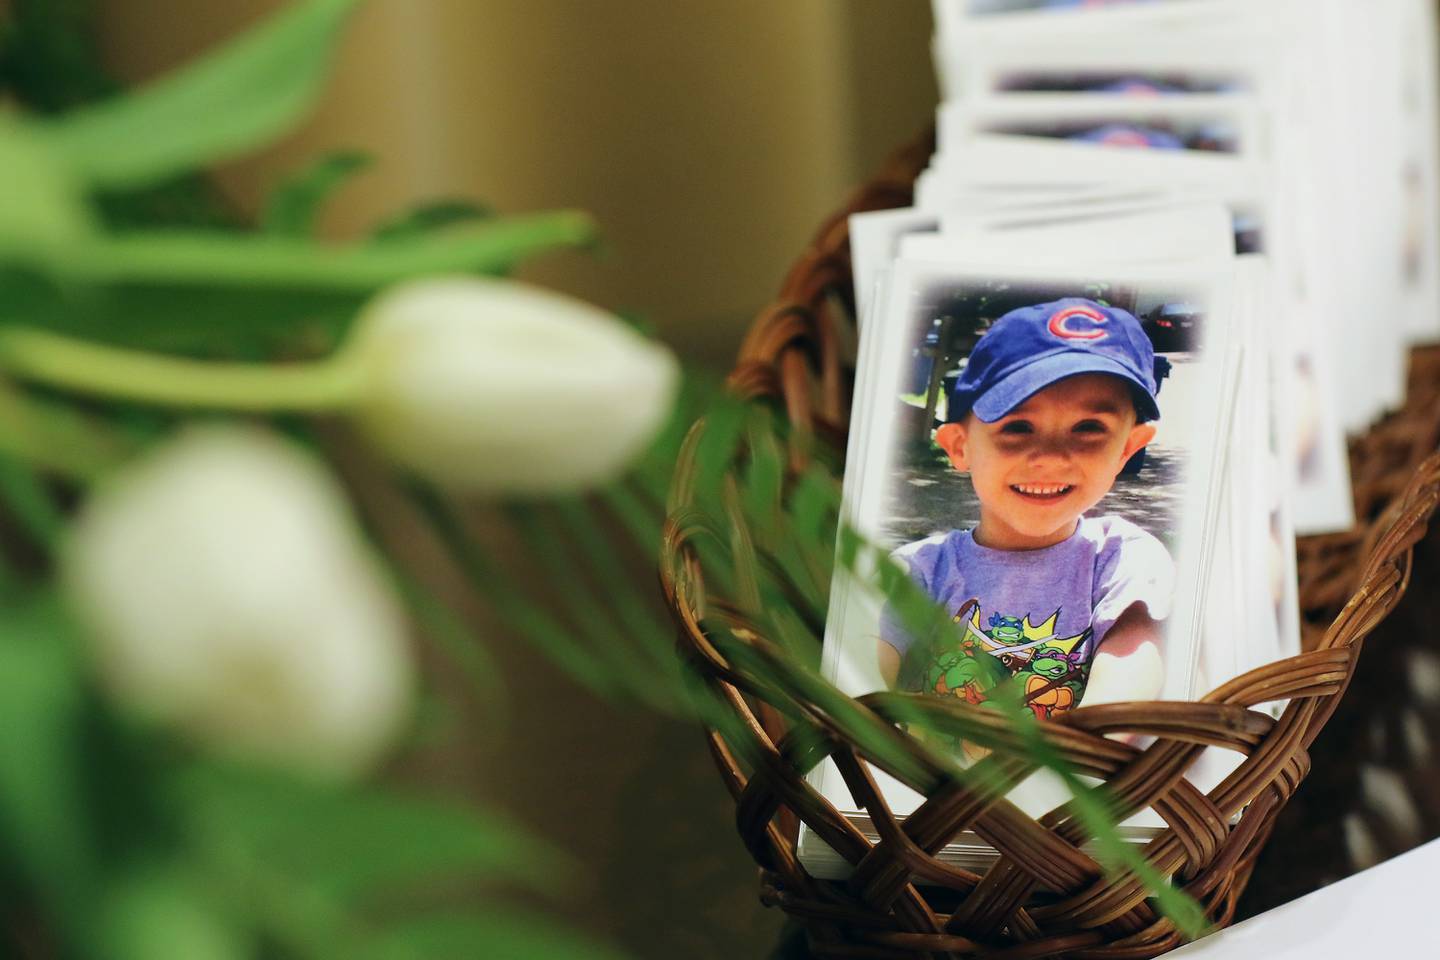 Prayer cards for AJ Freund, 5, sit on a table next to the visitor guestbook at Davenport Funeral Home on Friday, May 3, 2019 in Crystal Lake.